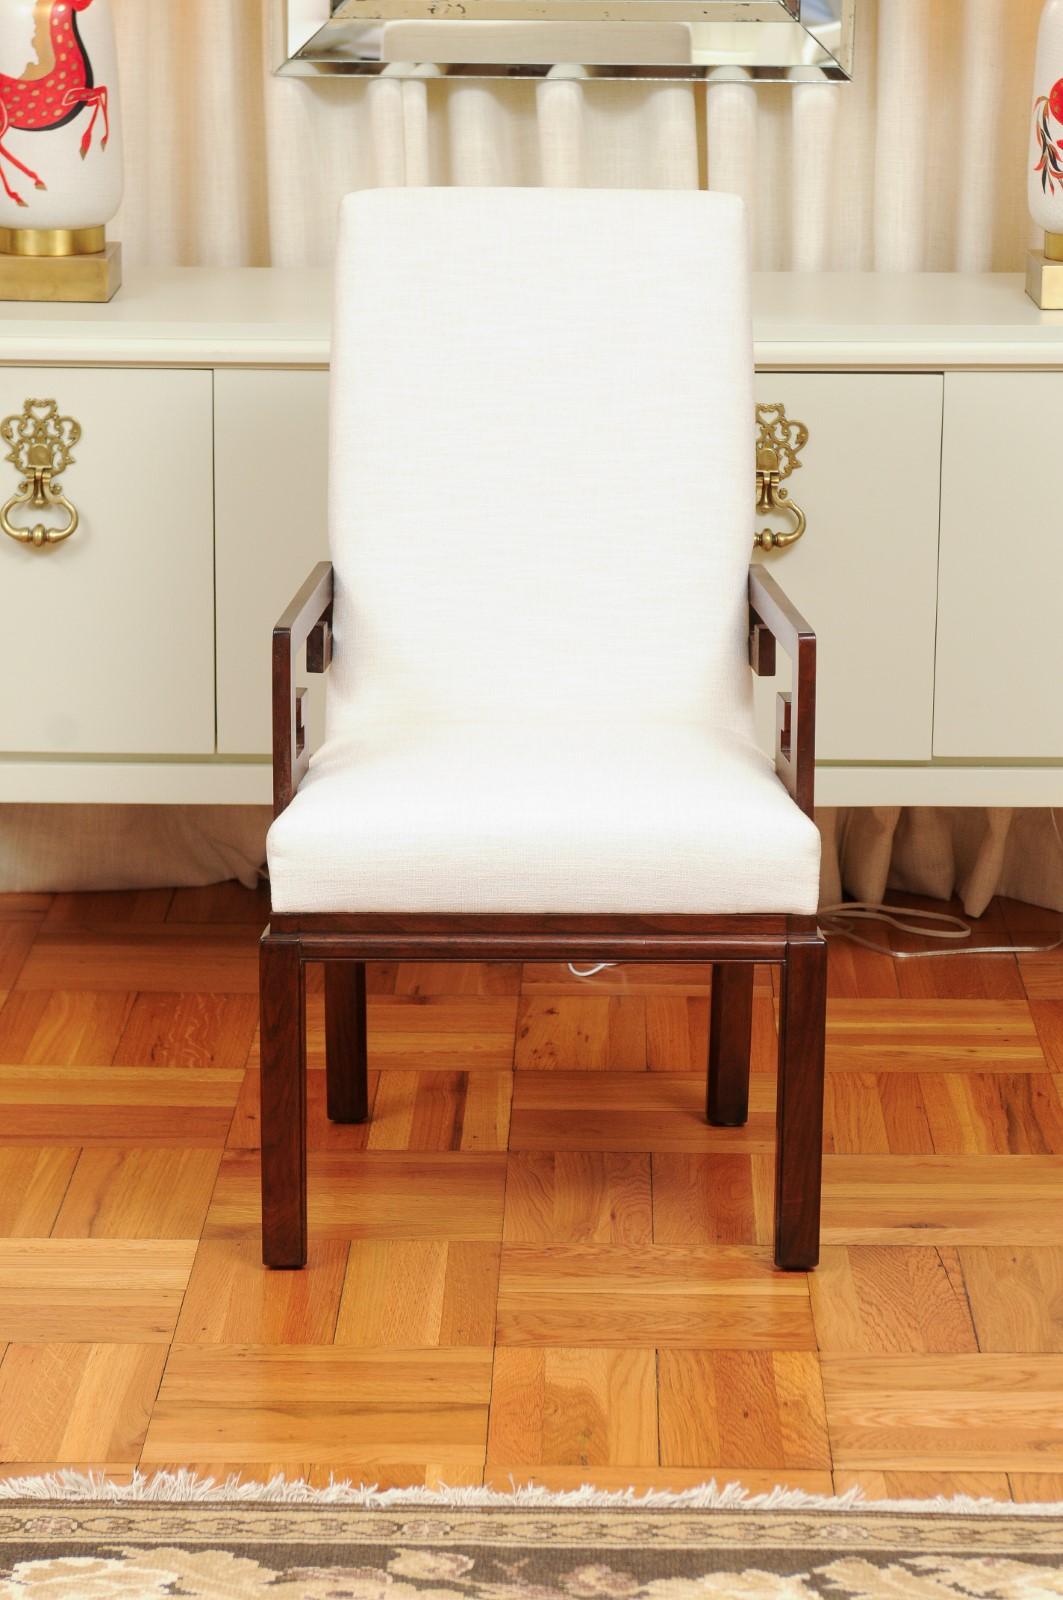 These magnificent dining chairs are shipped as professionally photographed and described in the listing narrative, completely installation ready. This all arm set is unique on the market. Expert custom upholstery service is available.

An